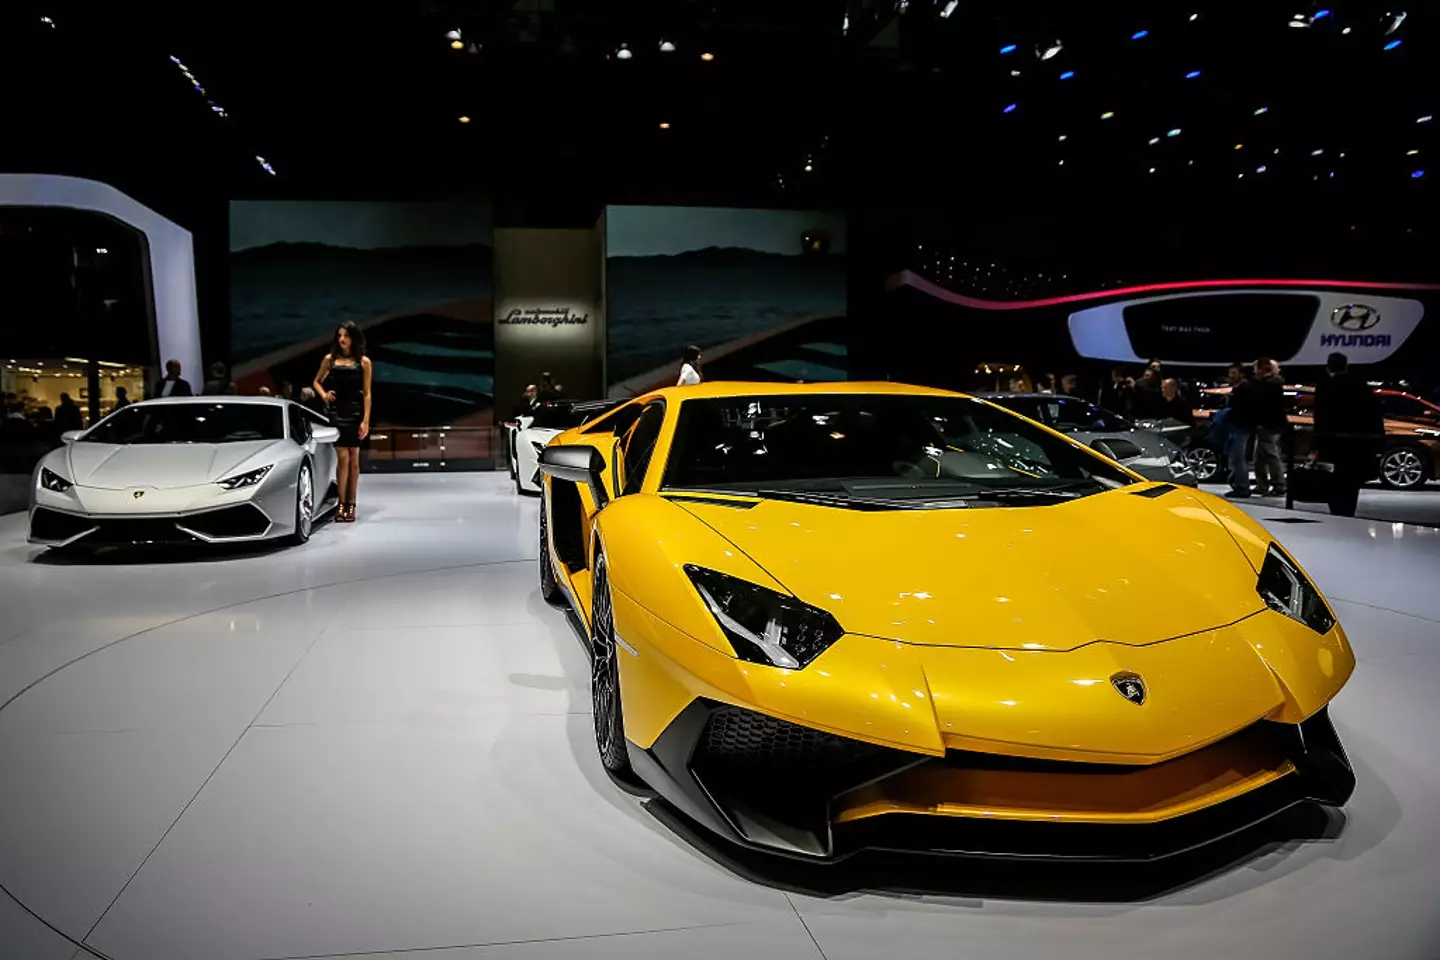 The Lamborghini Aventador is one of the rarest cars ever made by the manufacturer.